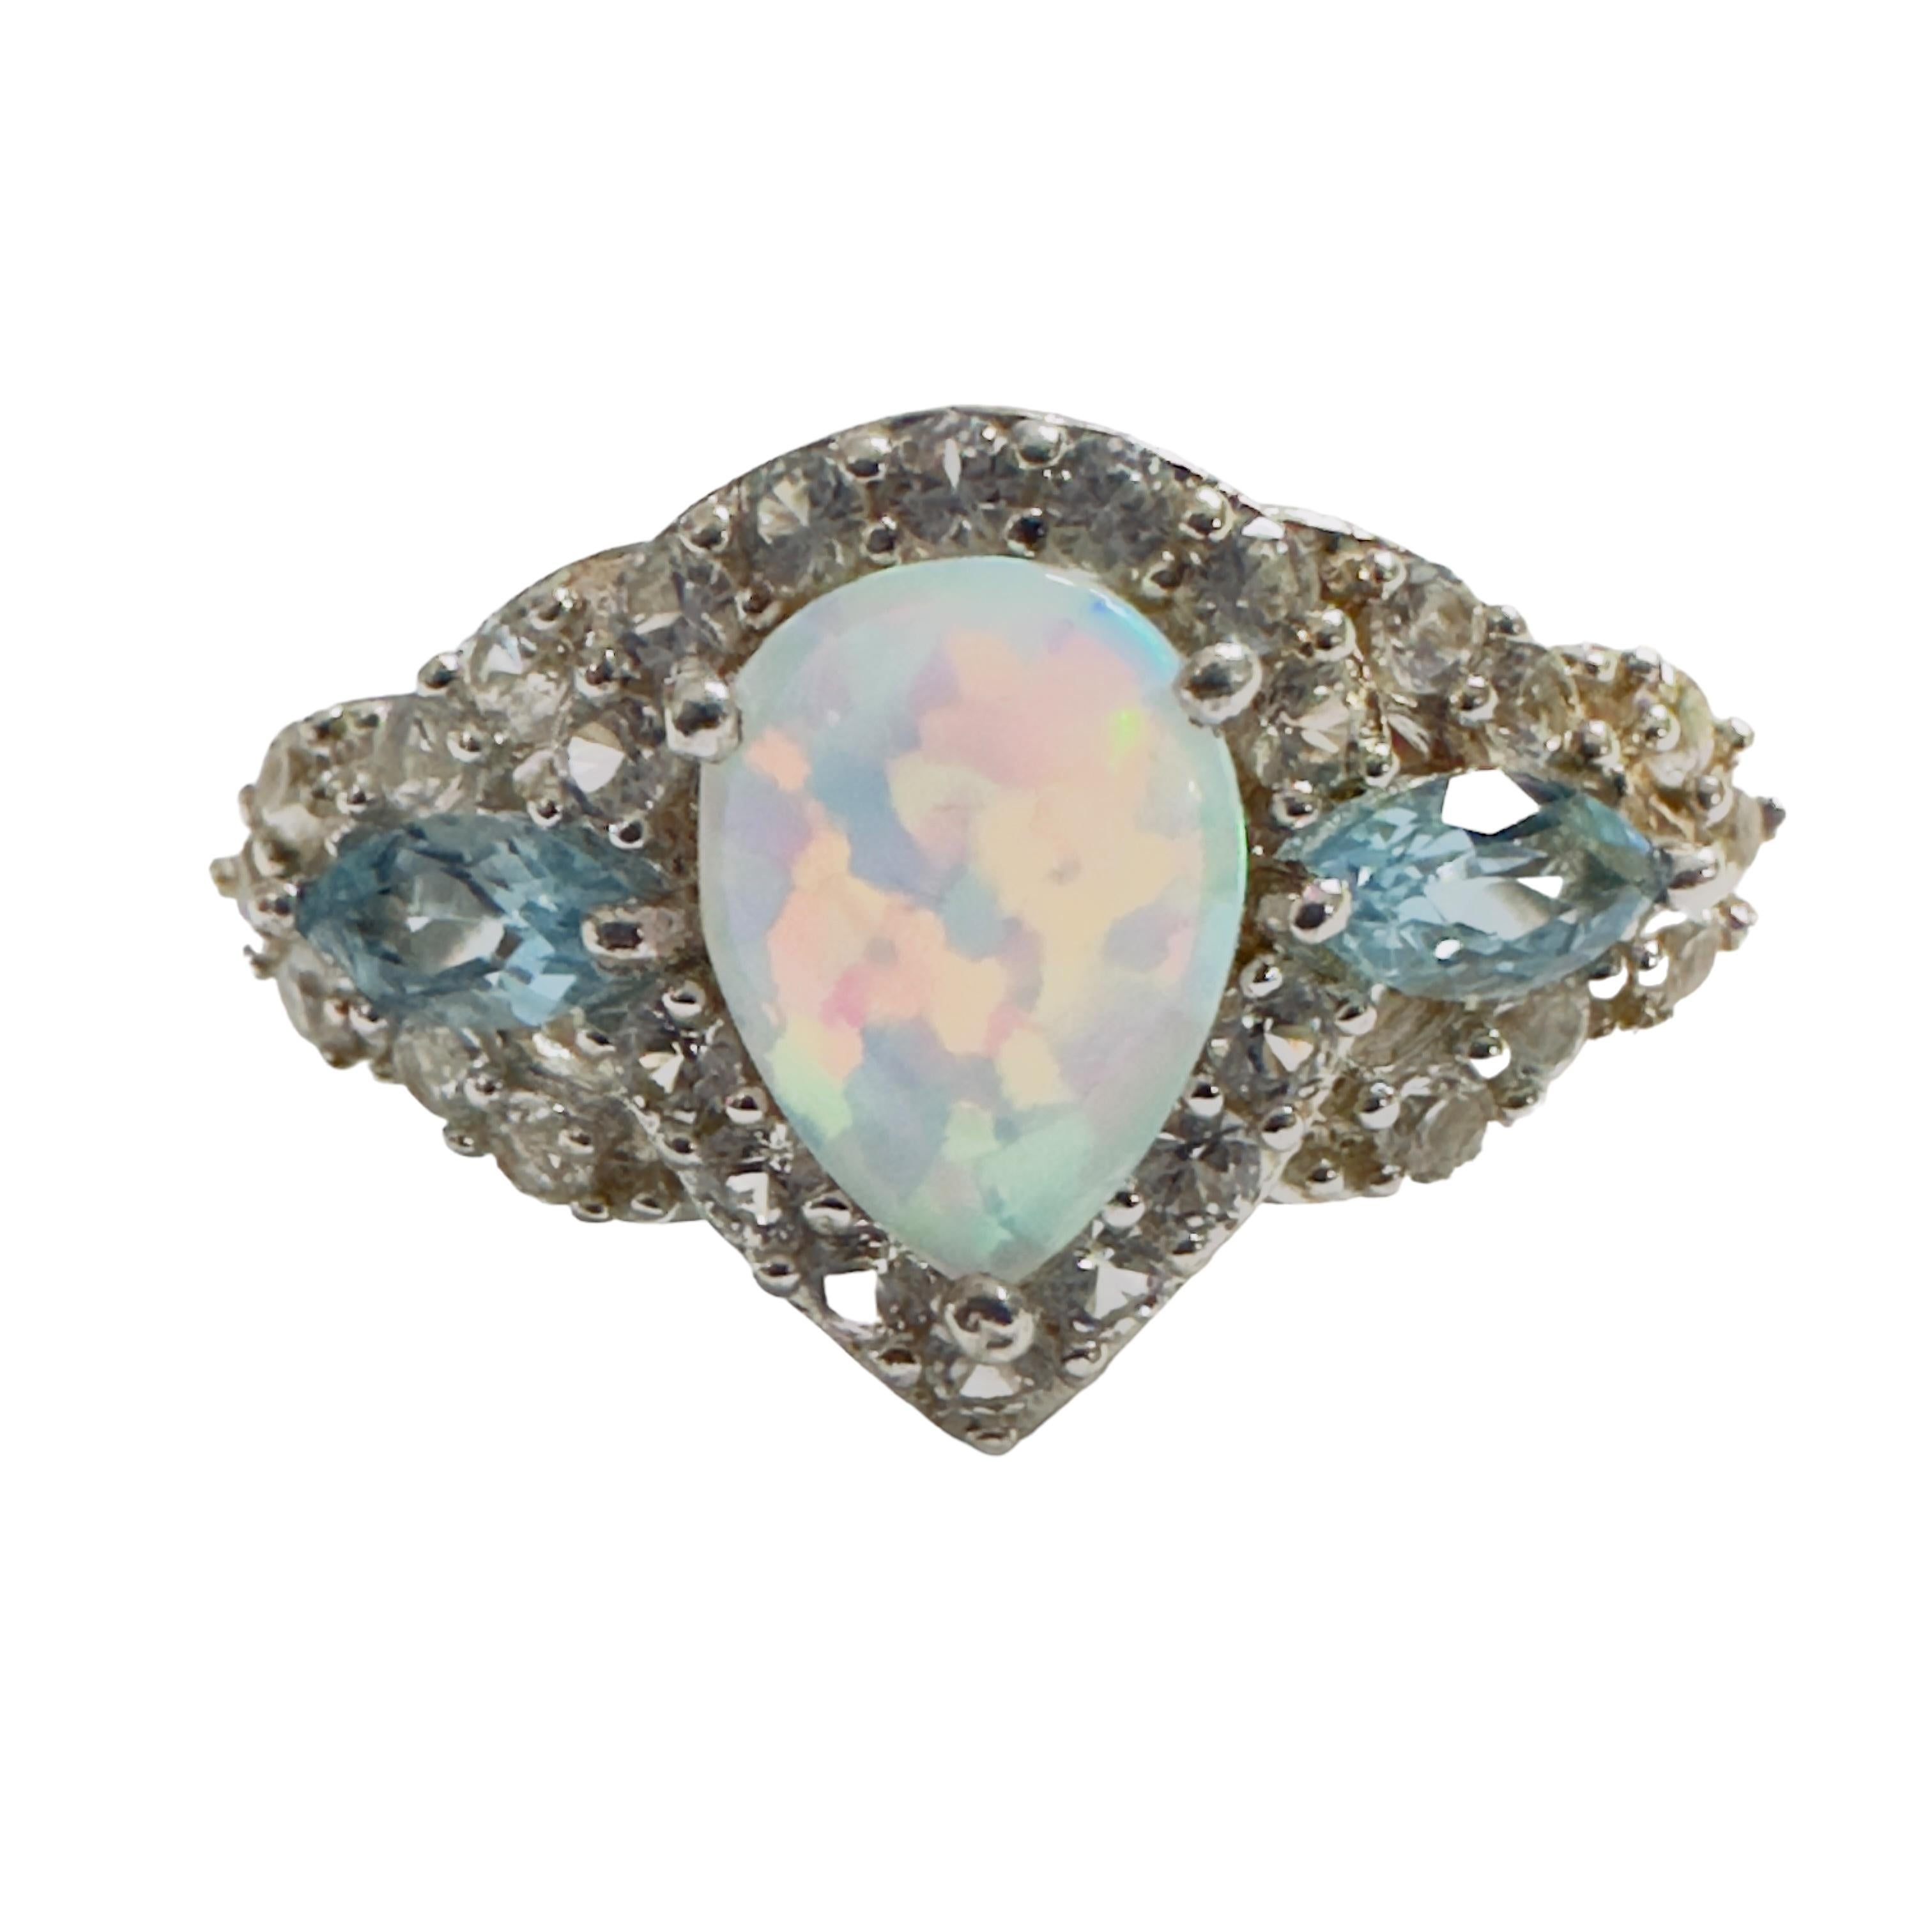 Art Deco Opal, Topaz and Sapphire Sterling Silver Ring Size 7.75